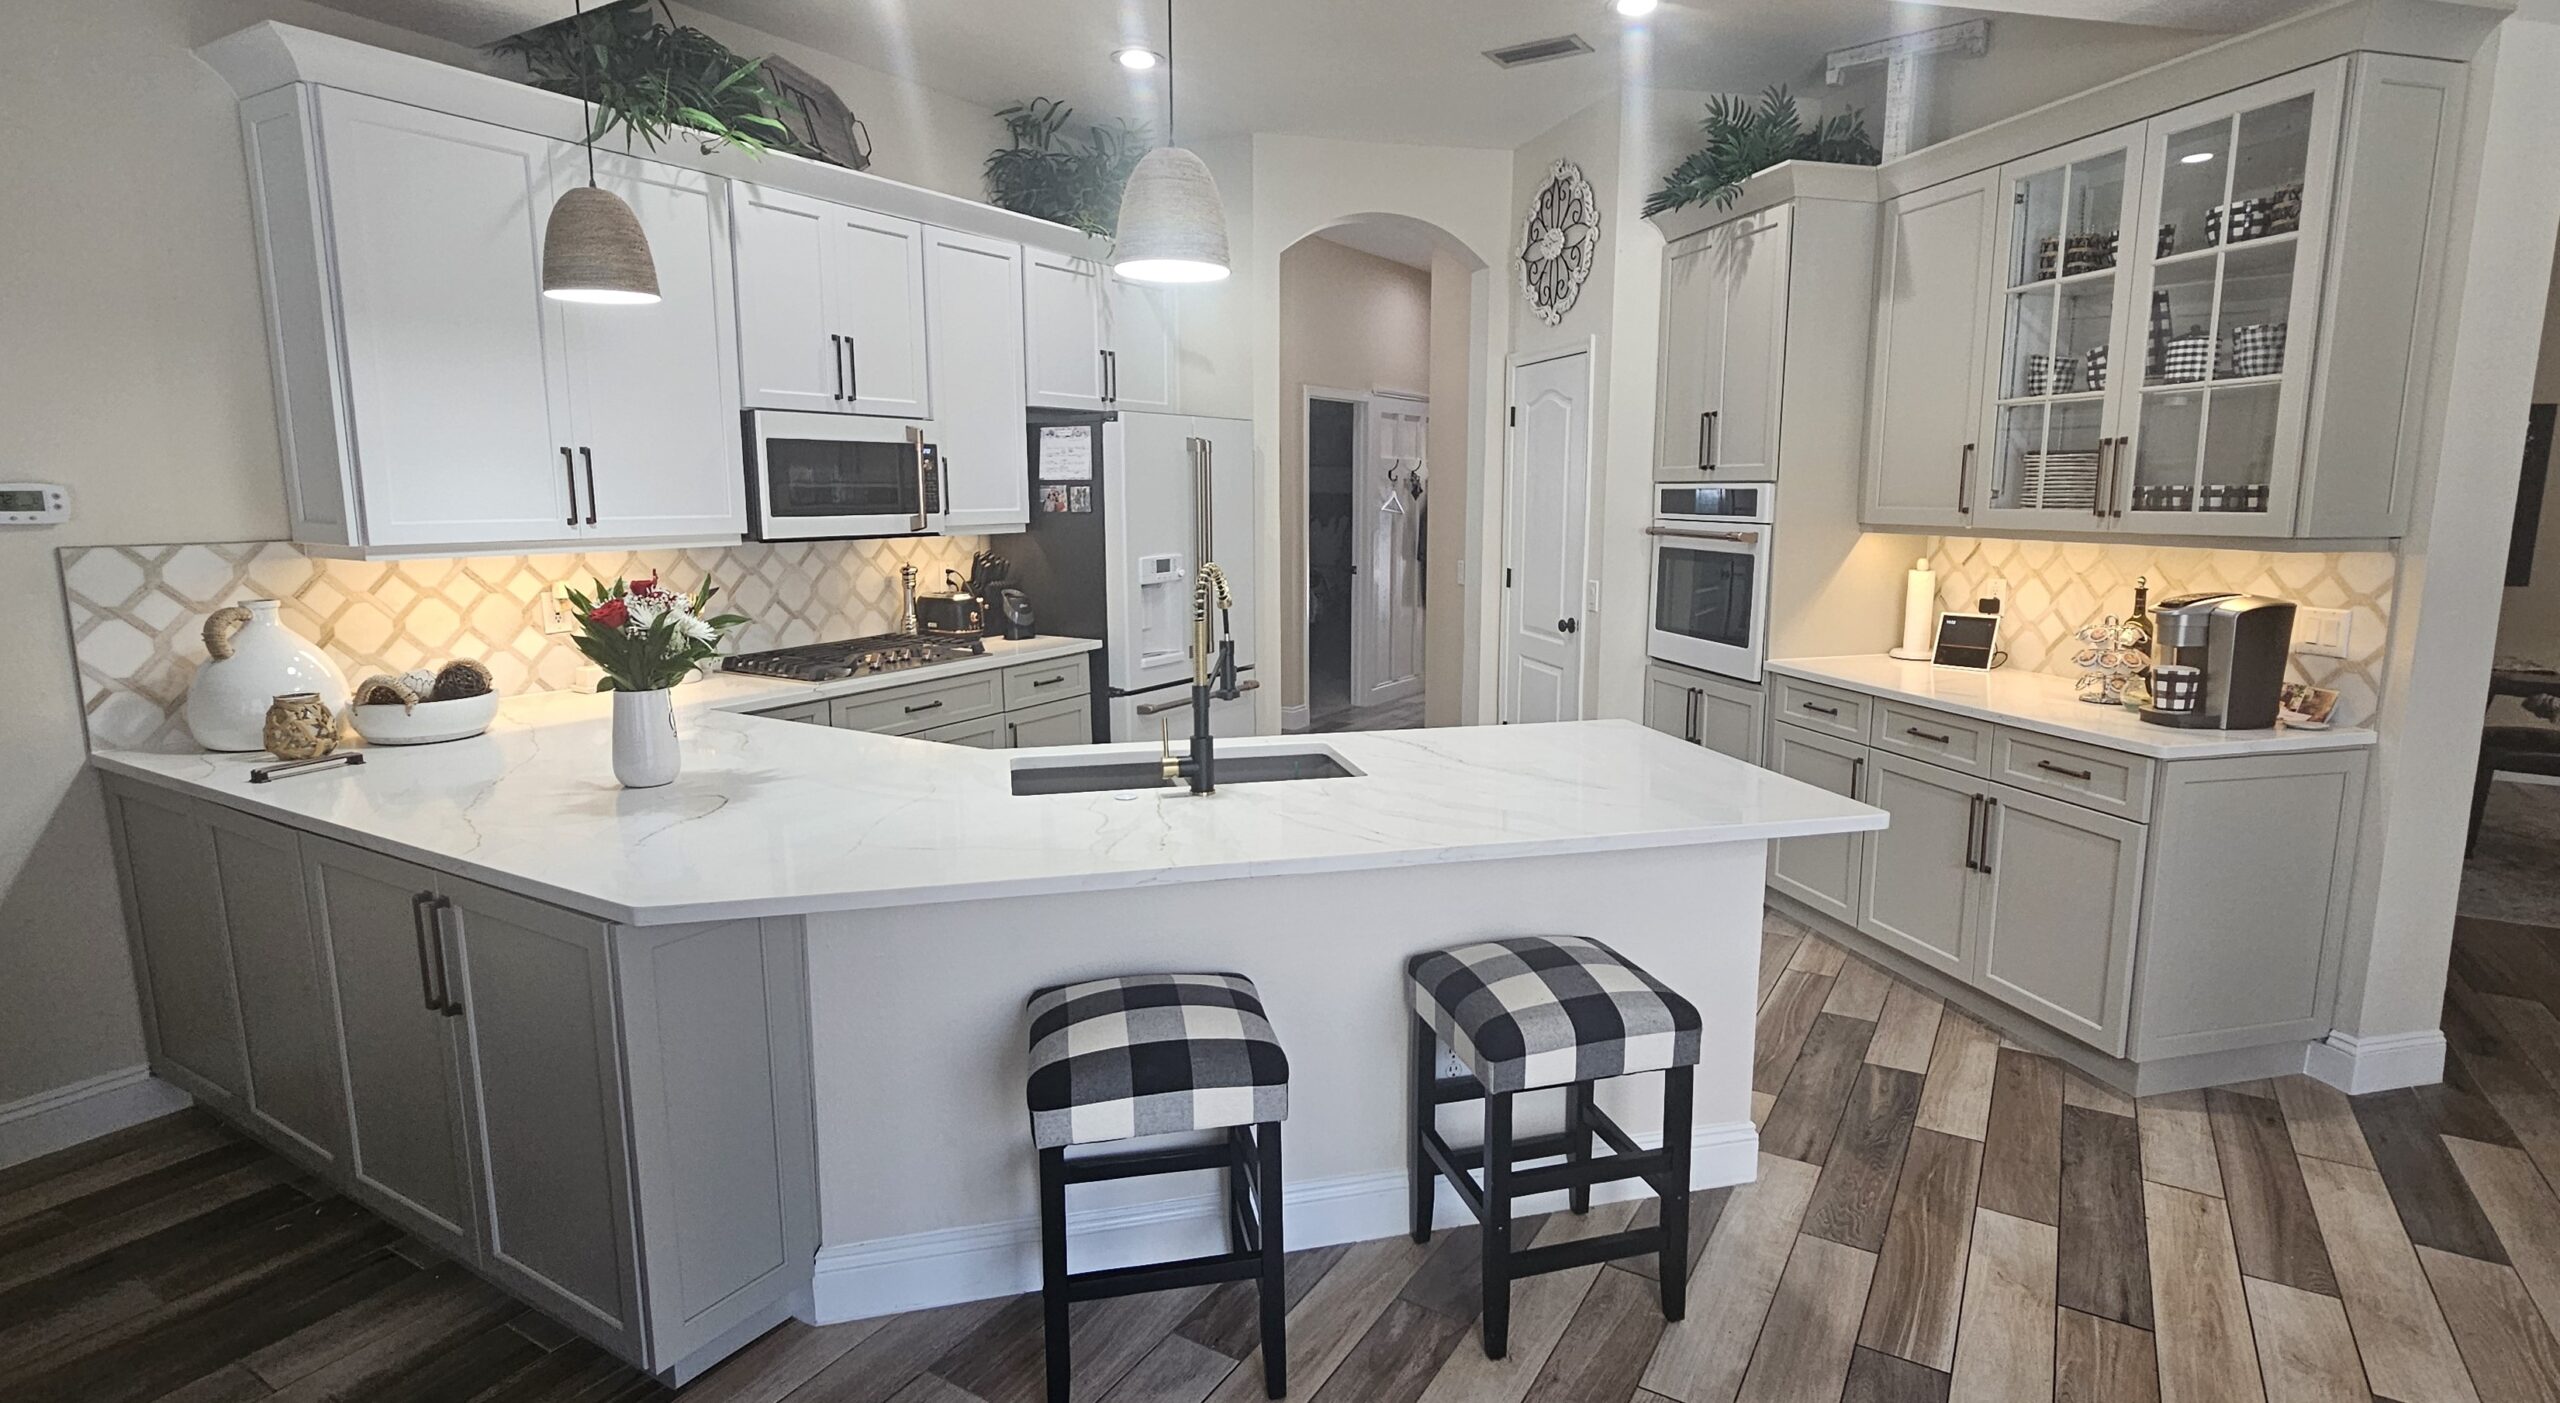 Modern appliances with a high-quality finish, granite worktops, and sleek white cabinet doors in East Lake 